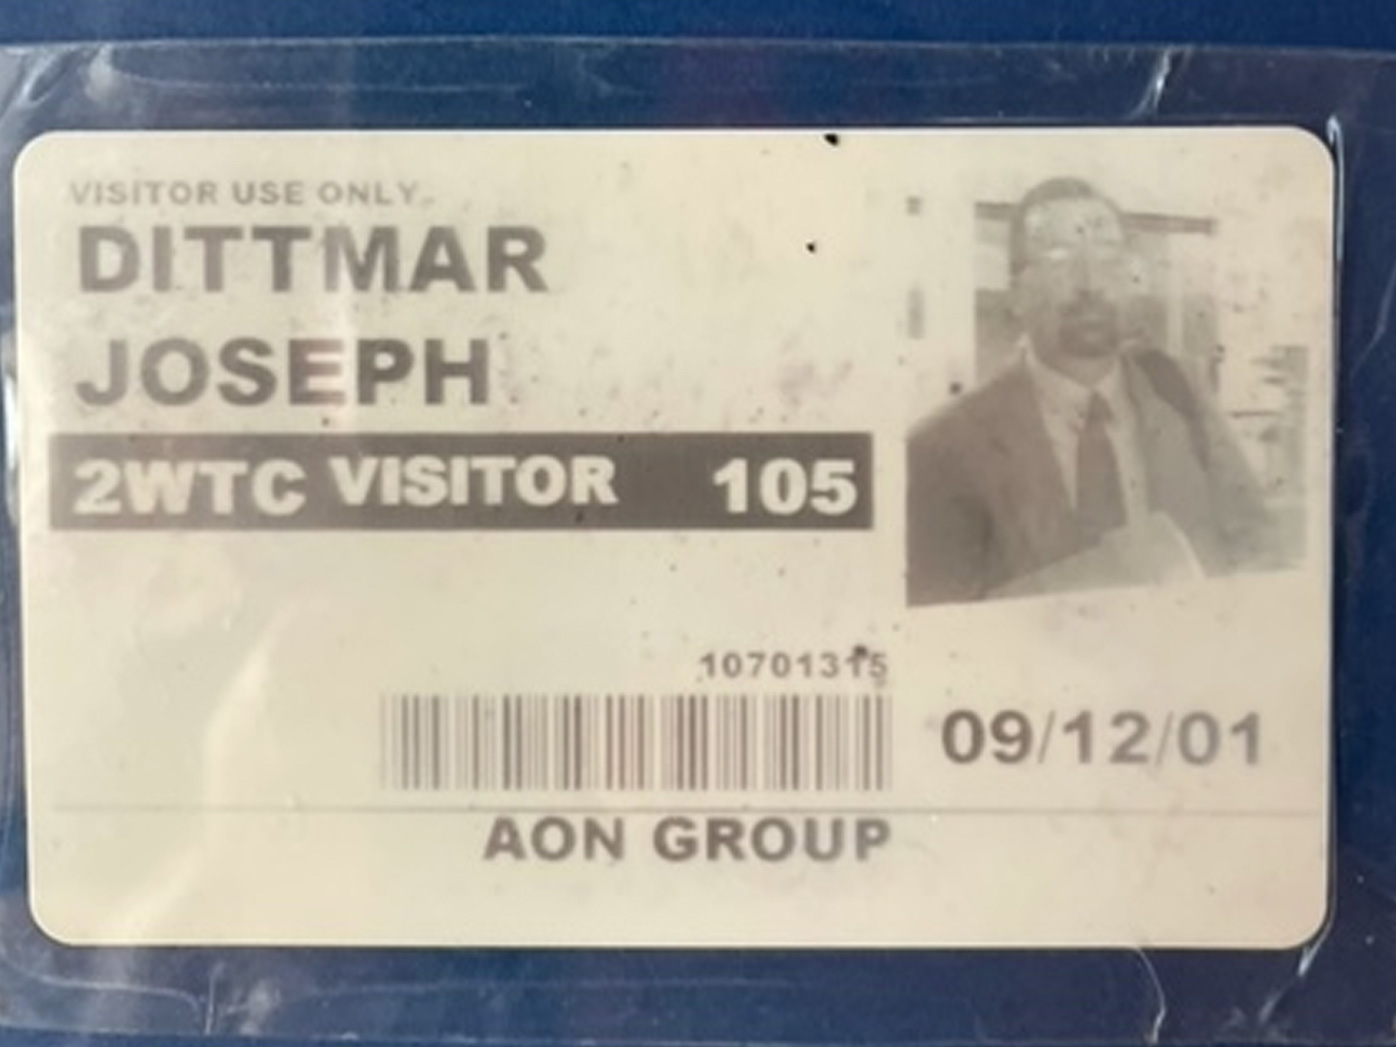 Joe Dittmar's pass to enter the World Trade Center on September 11, a day when nearly 3000 people were killed in a devastating terror attack.